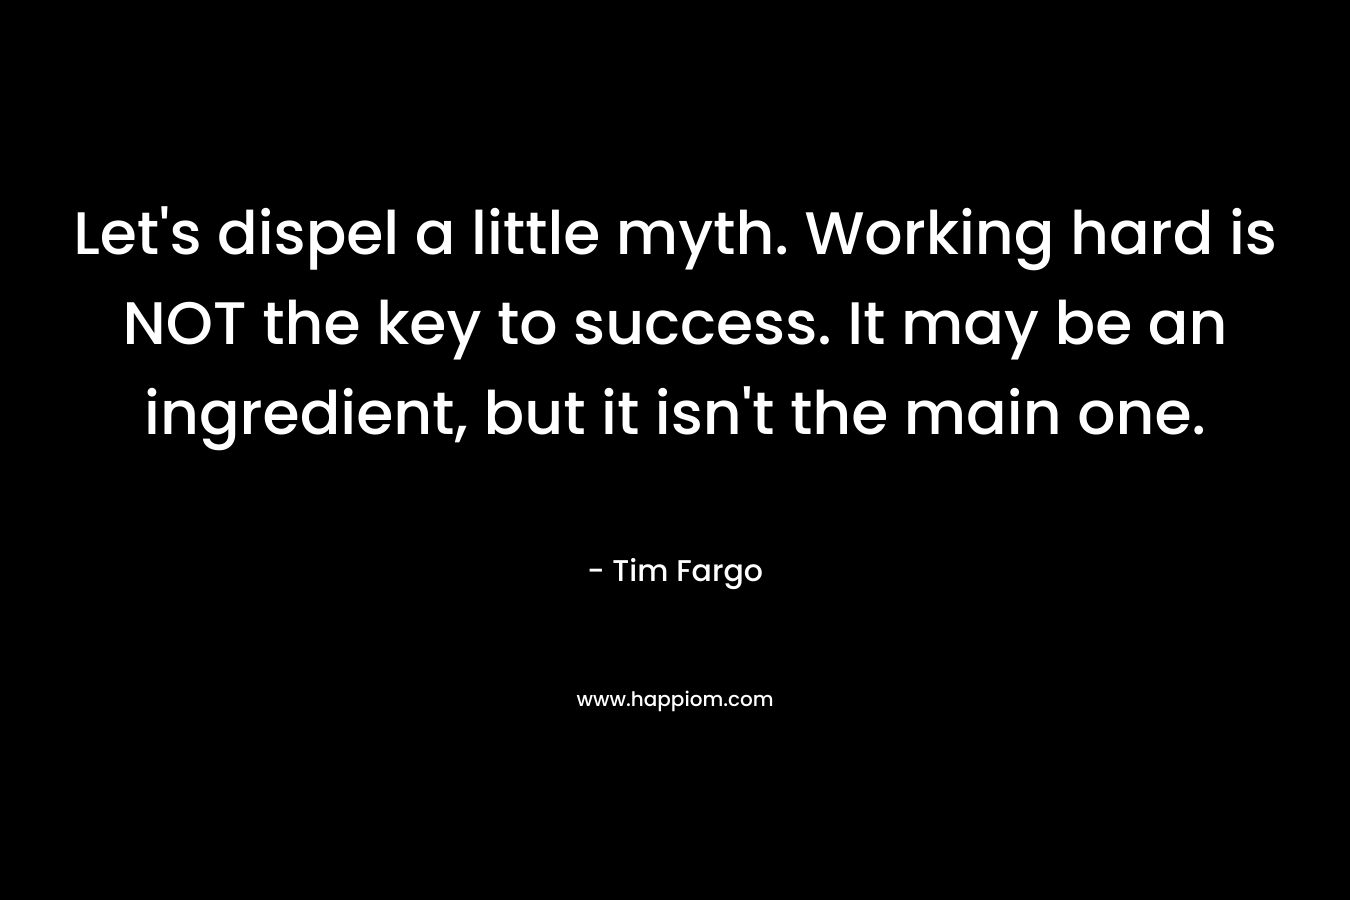 Let's dispel a little myth. Working hard is NOT the key to success. It may be an ingredient, but it isn't the main one.